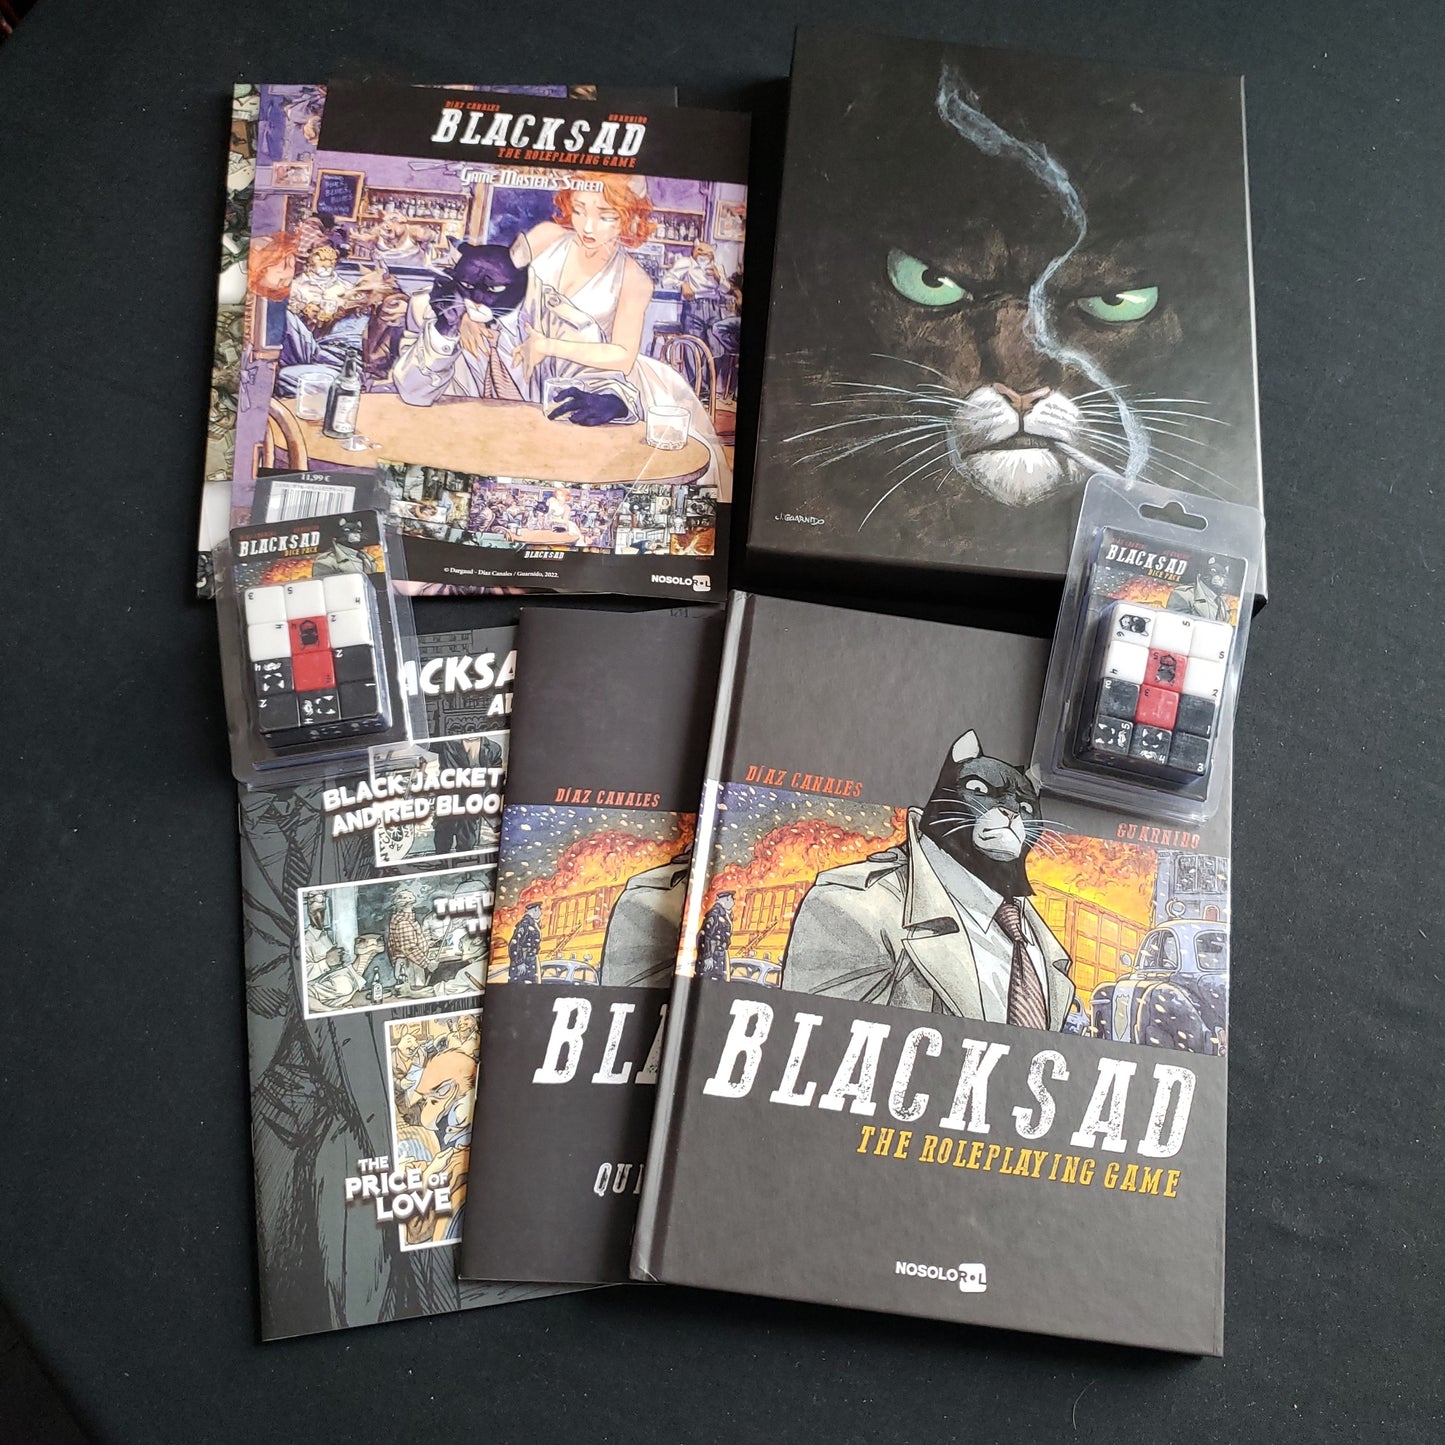 Image shows the books & components from the True Detective Kickstarter pledge level for Blacksad: The Roleplaying Game fanned out on a table